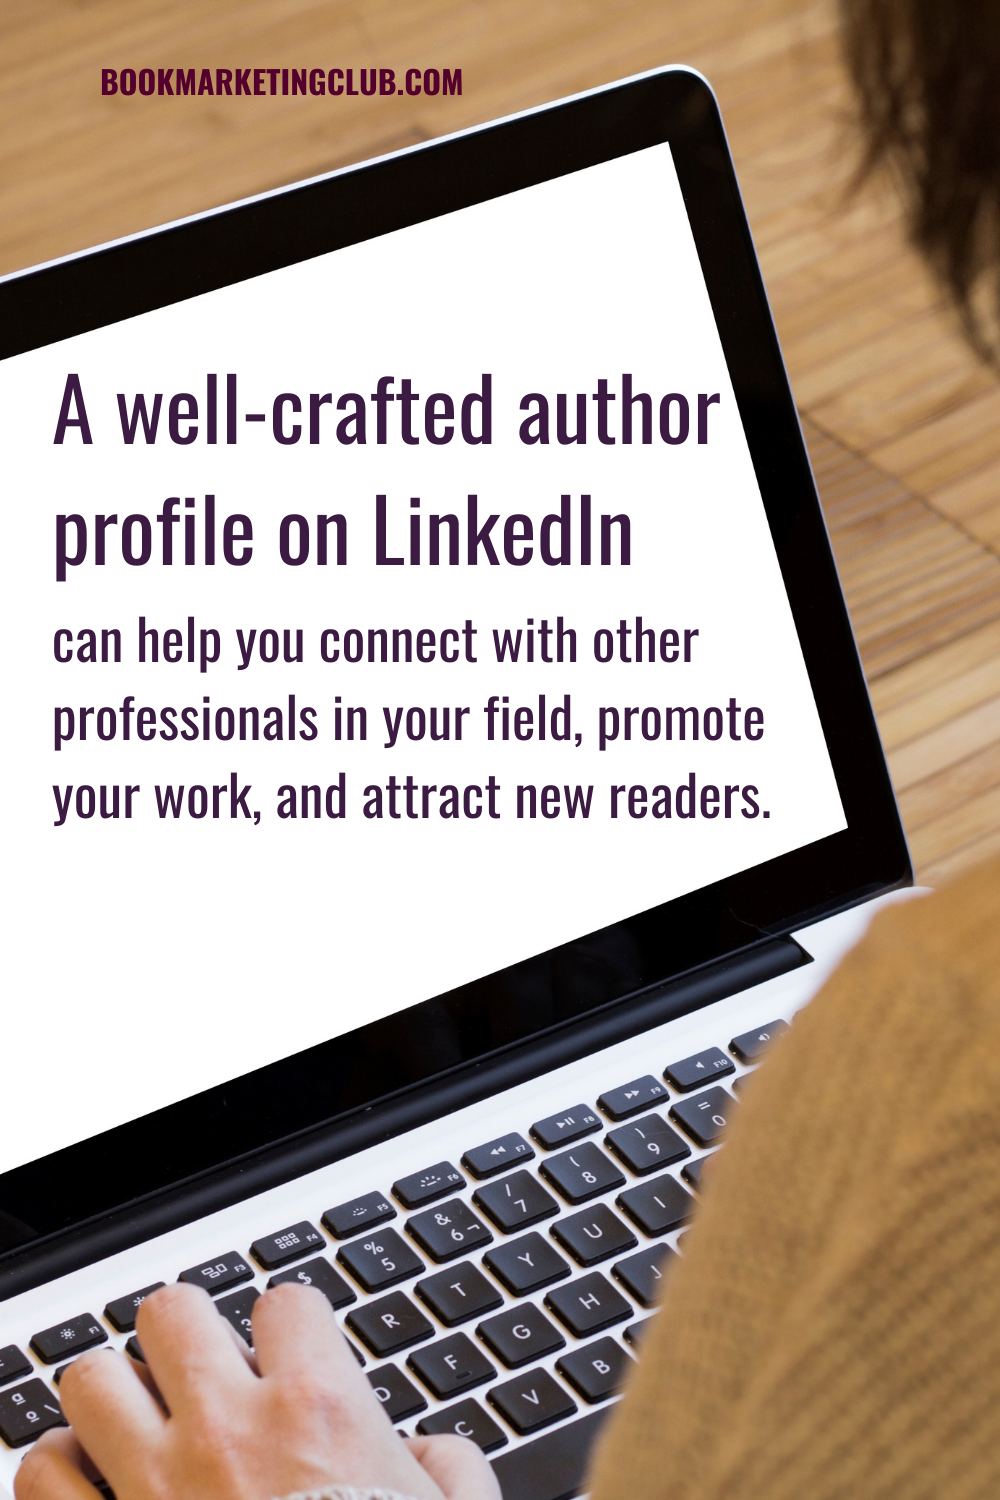 A well-crafted author profile on LinkedIn